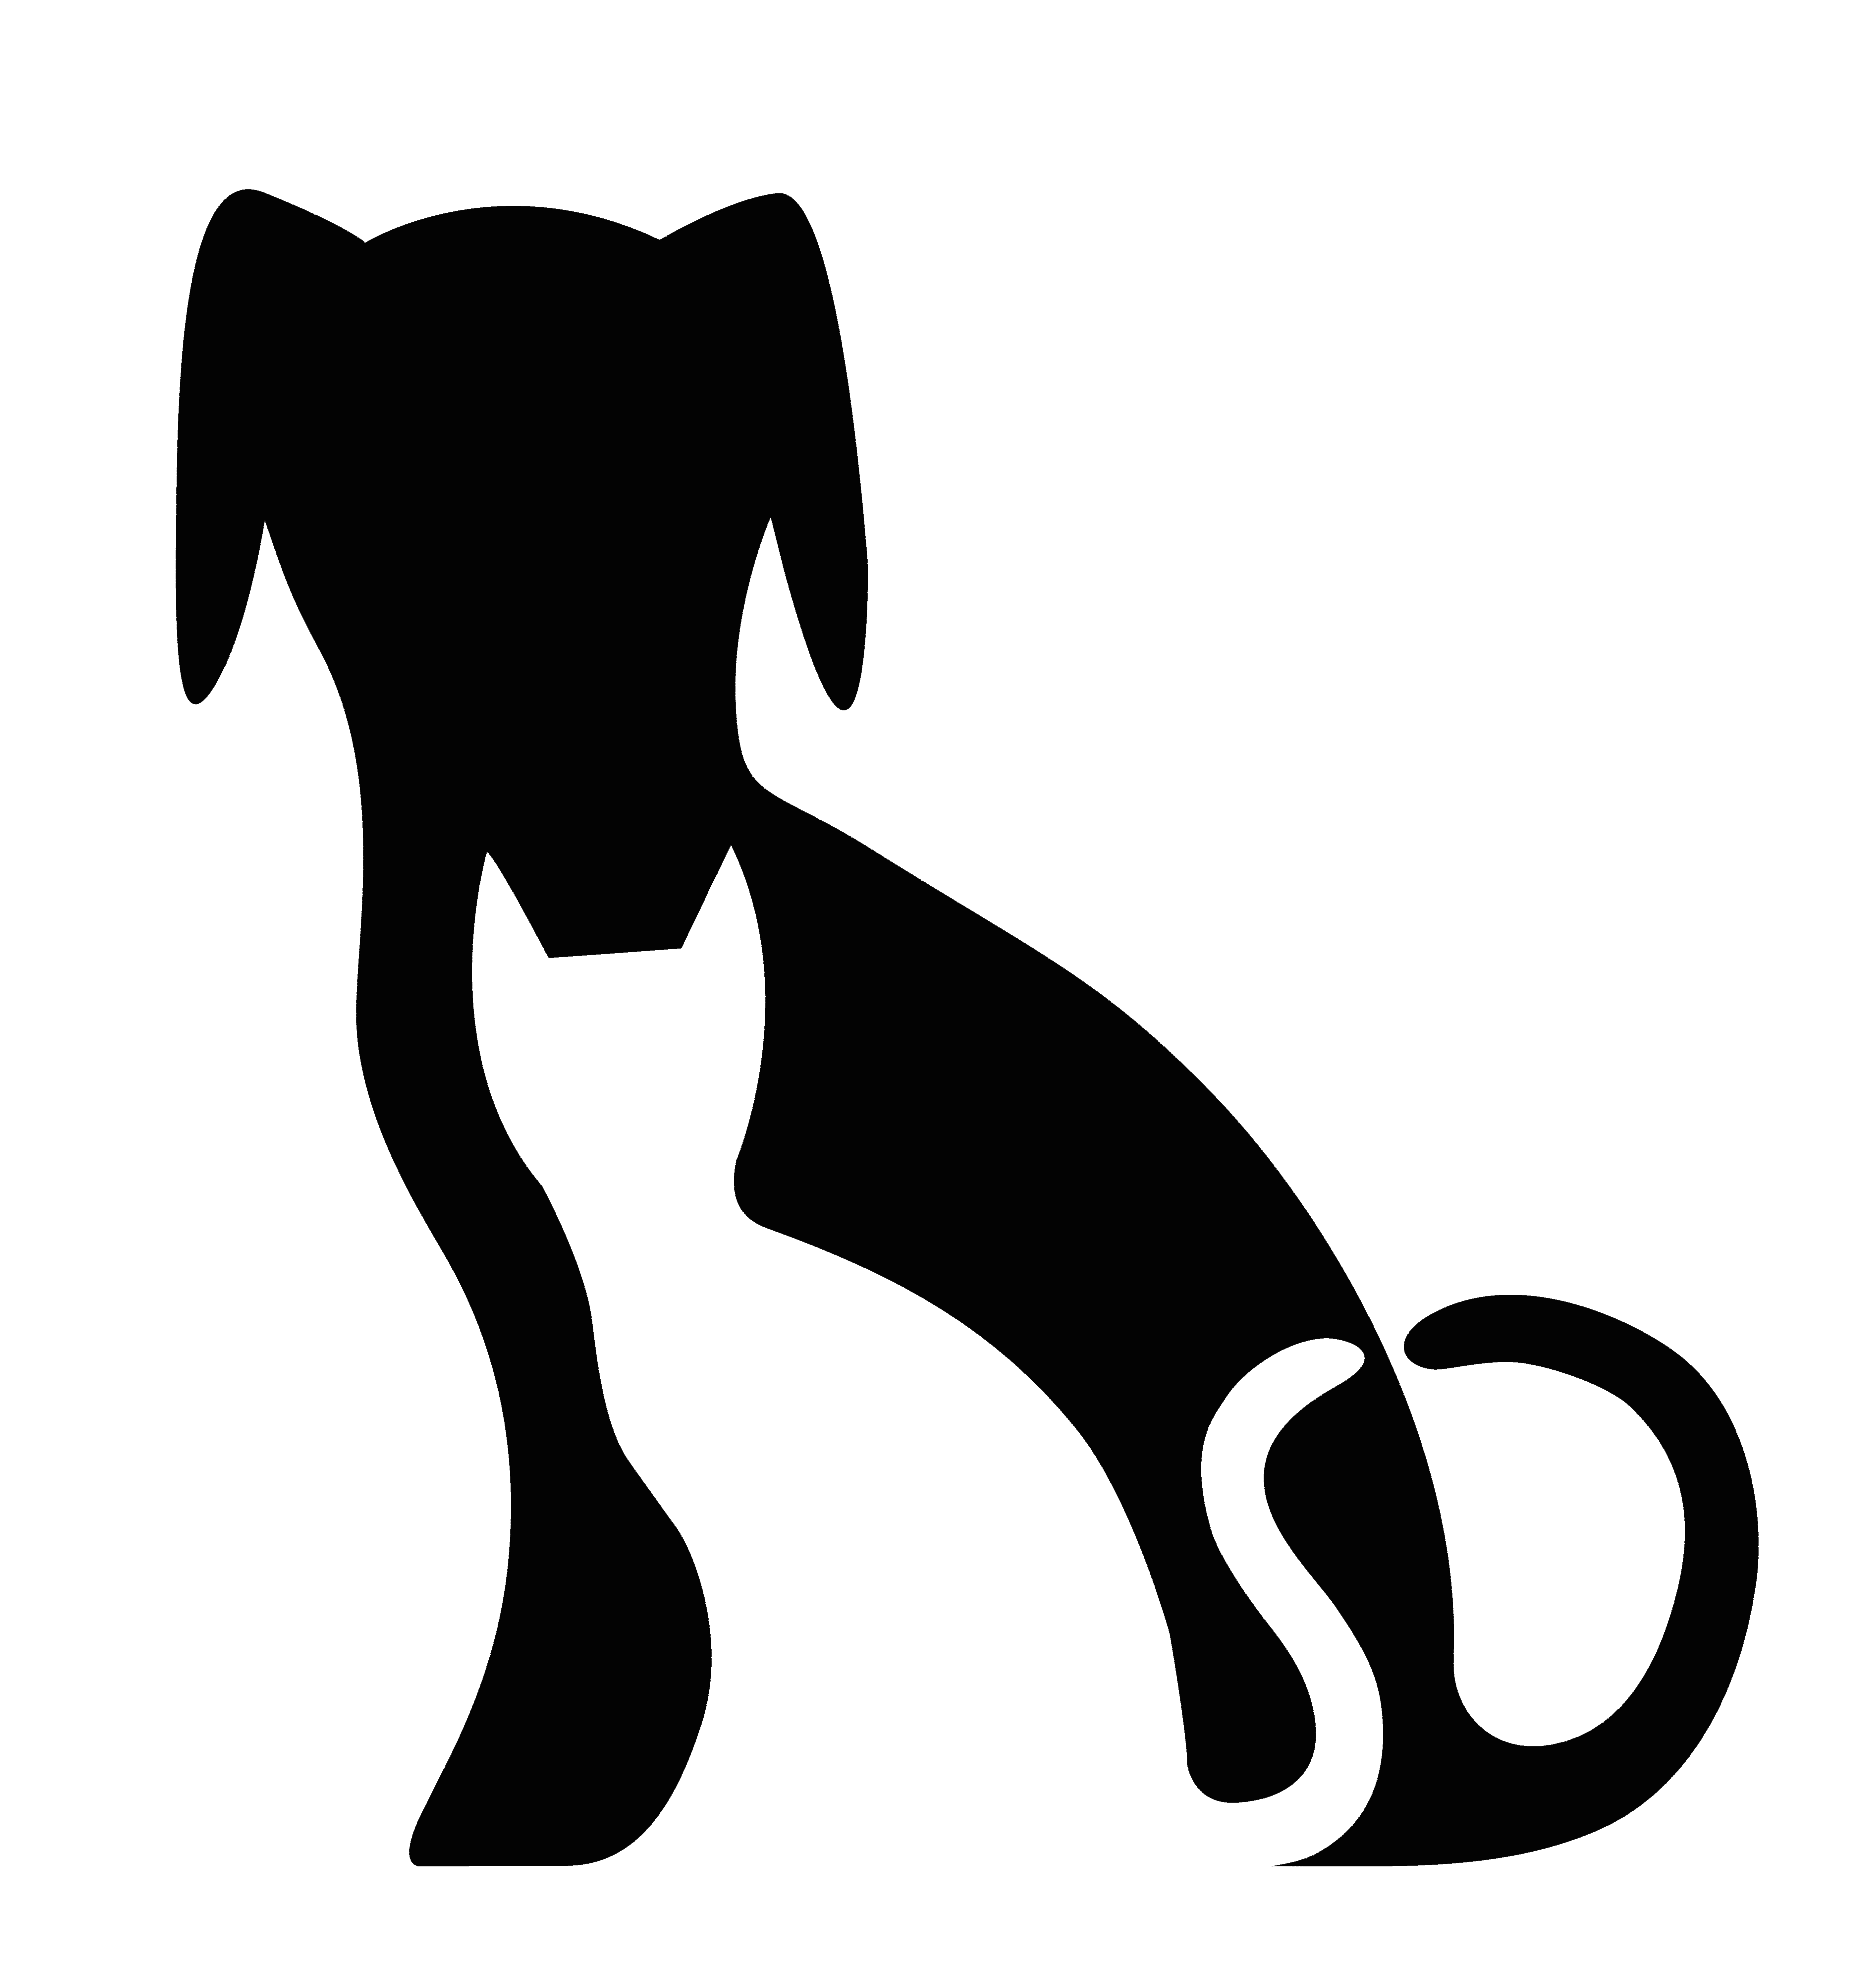 Vaccine clipart black and white. Town center animal clinic